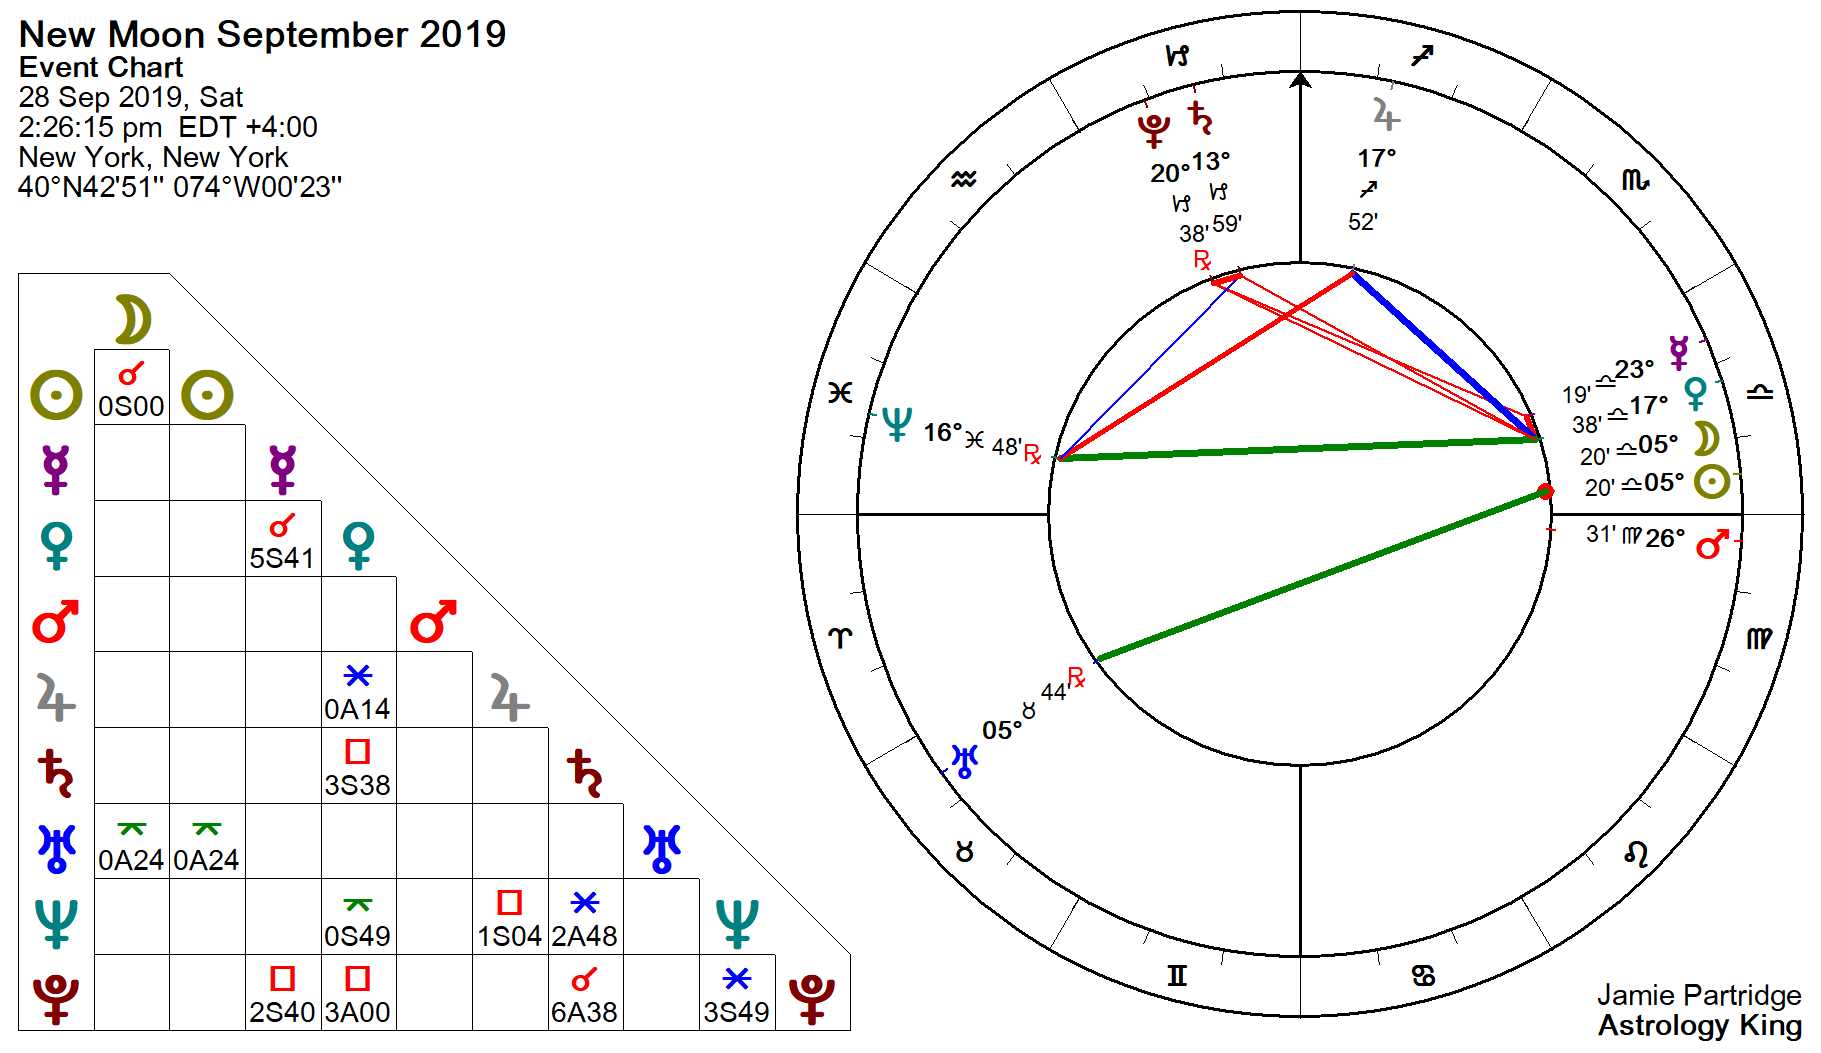 New Moon September 2019 Love Is In The Air Astrology King new moon september 2019 love is in